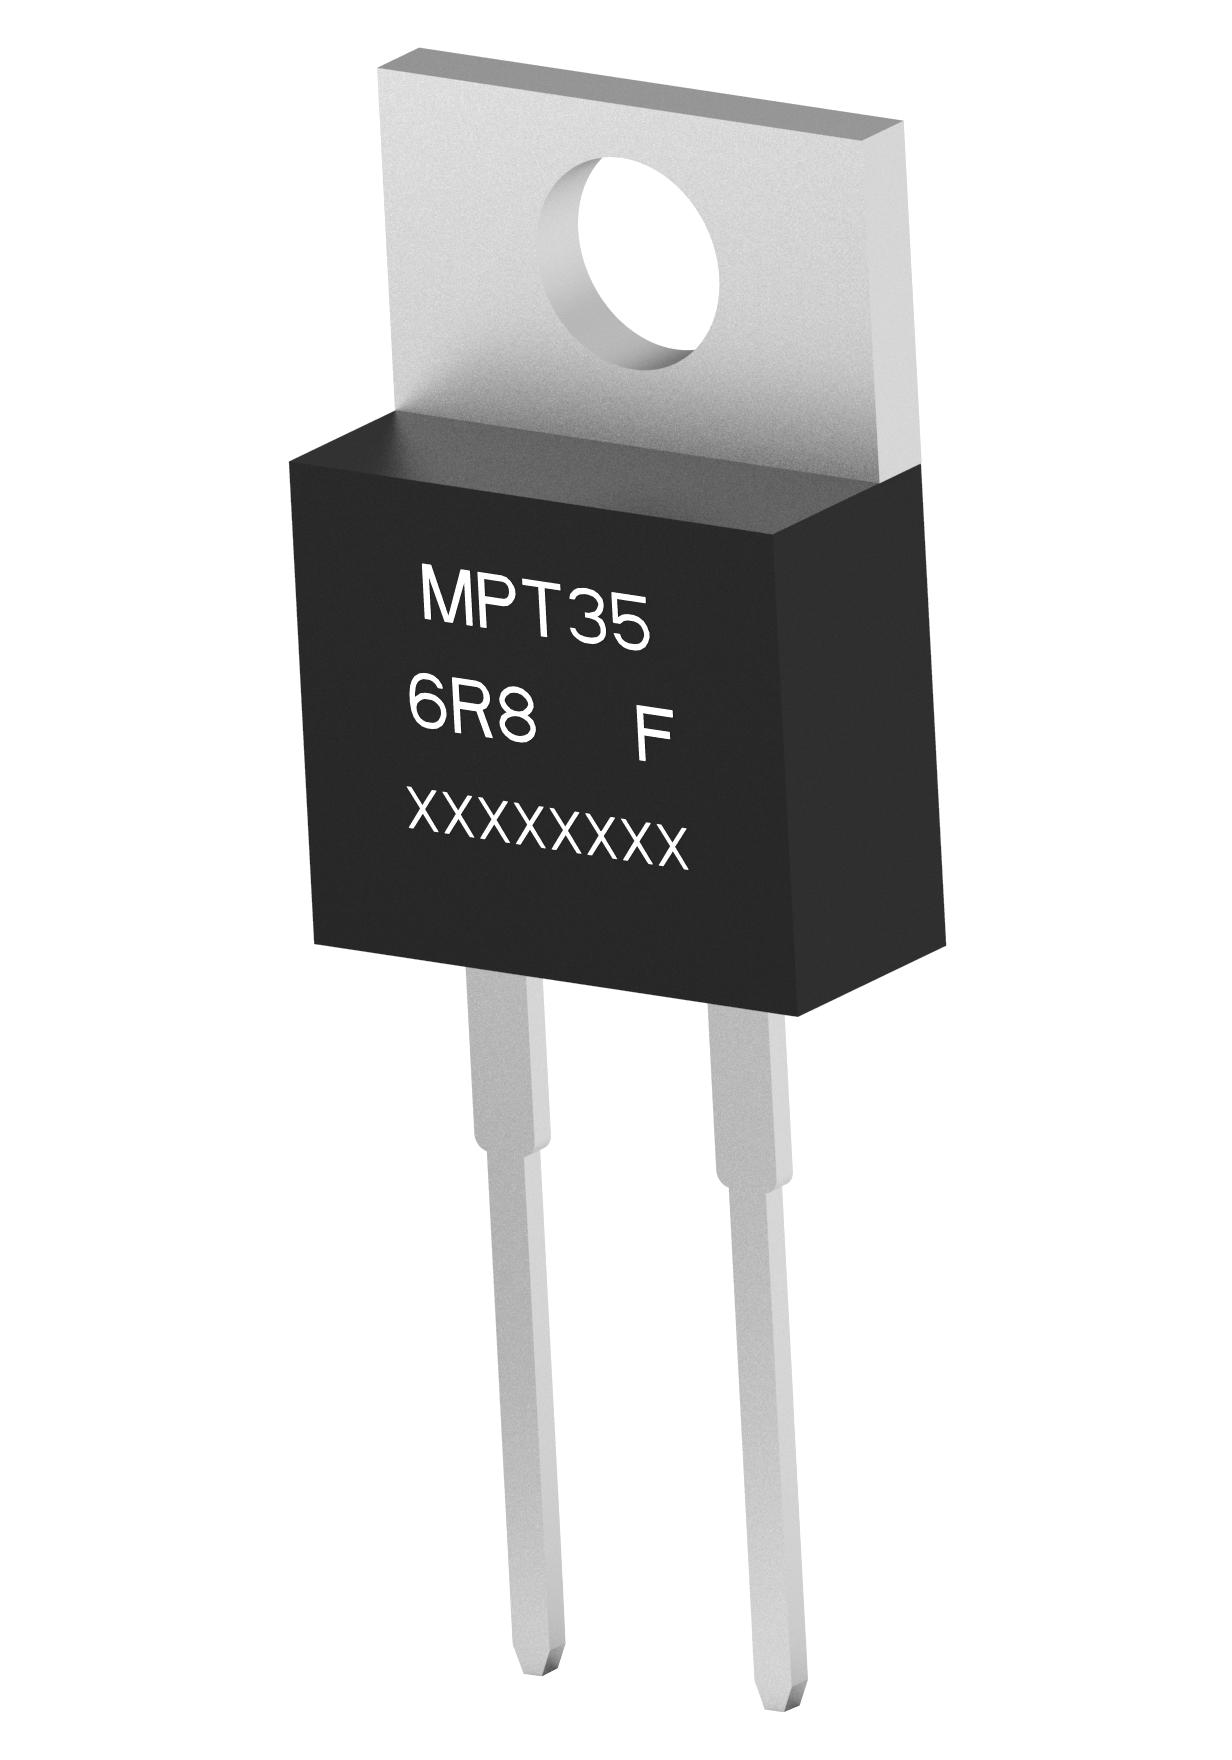 CGS TE Connectivity Mpt35 1R2 1% Res, 1R2, 35W, To-220, Thick Film